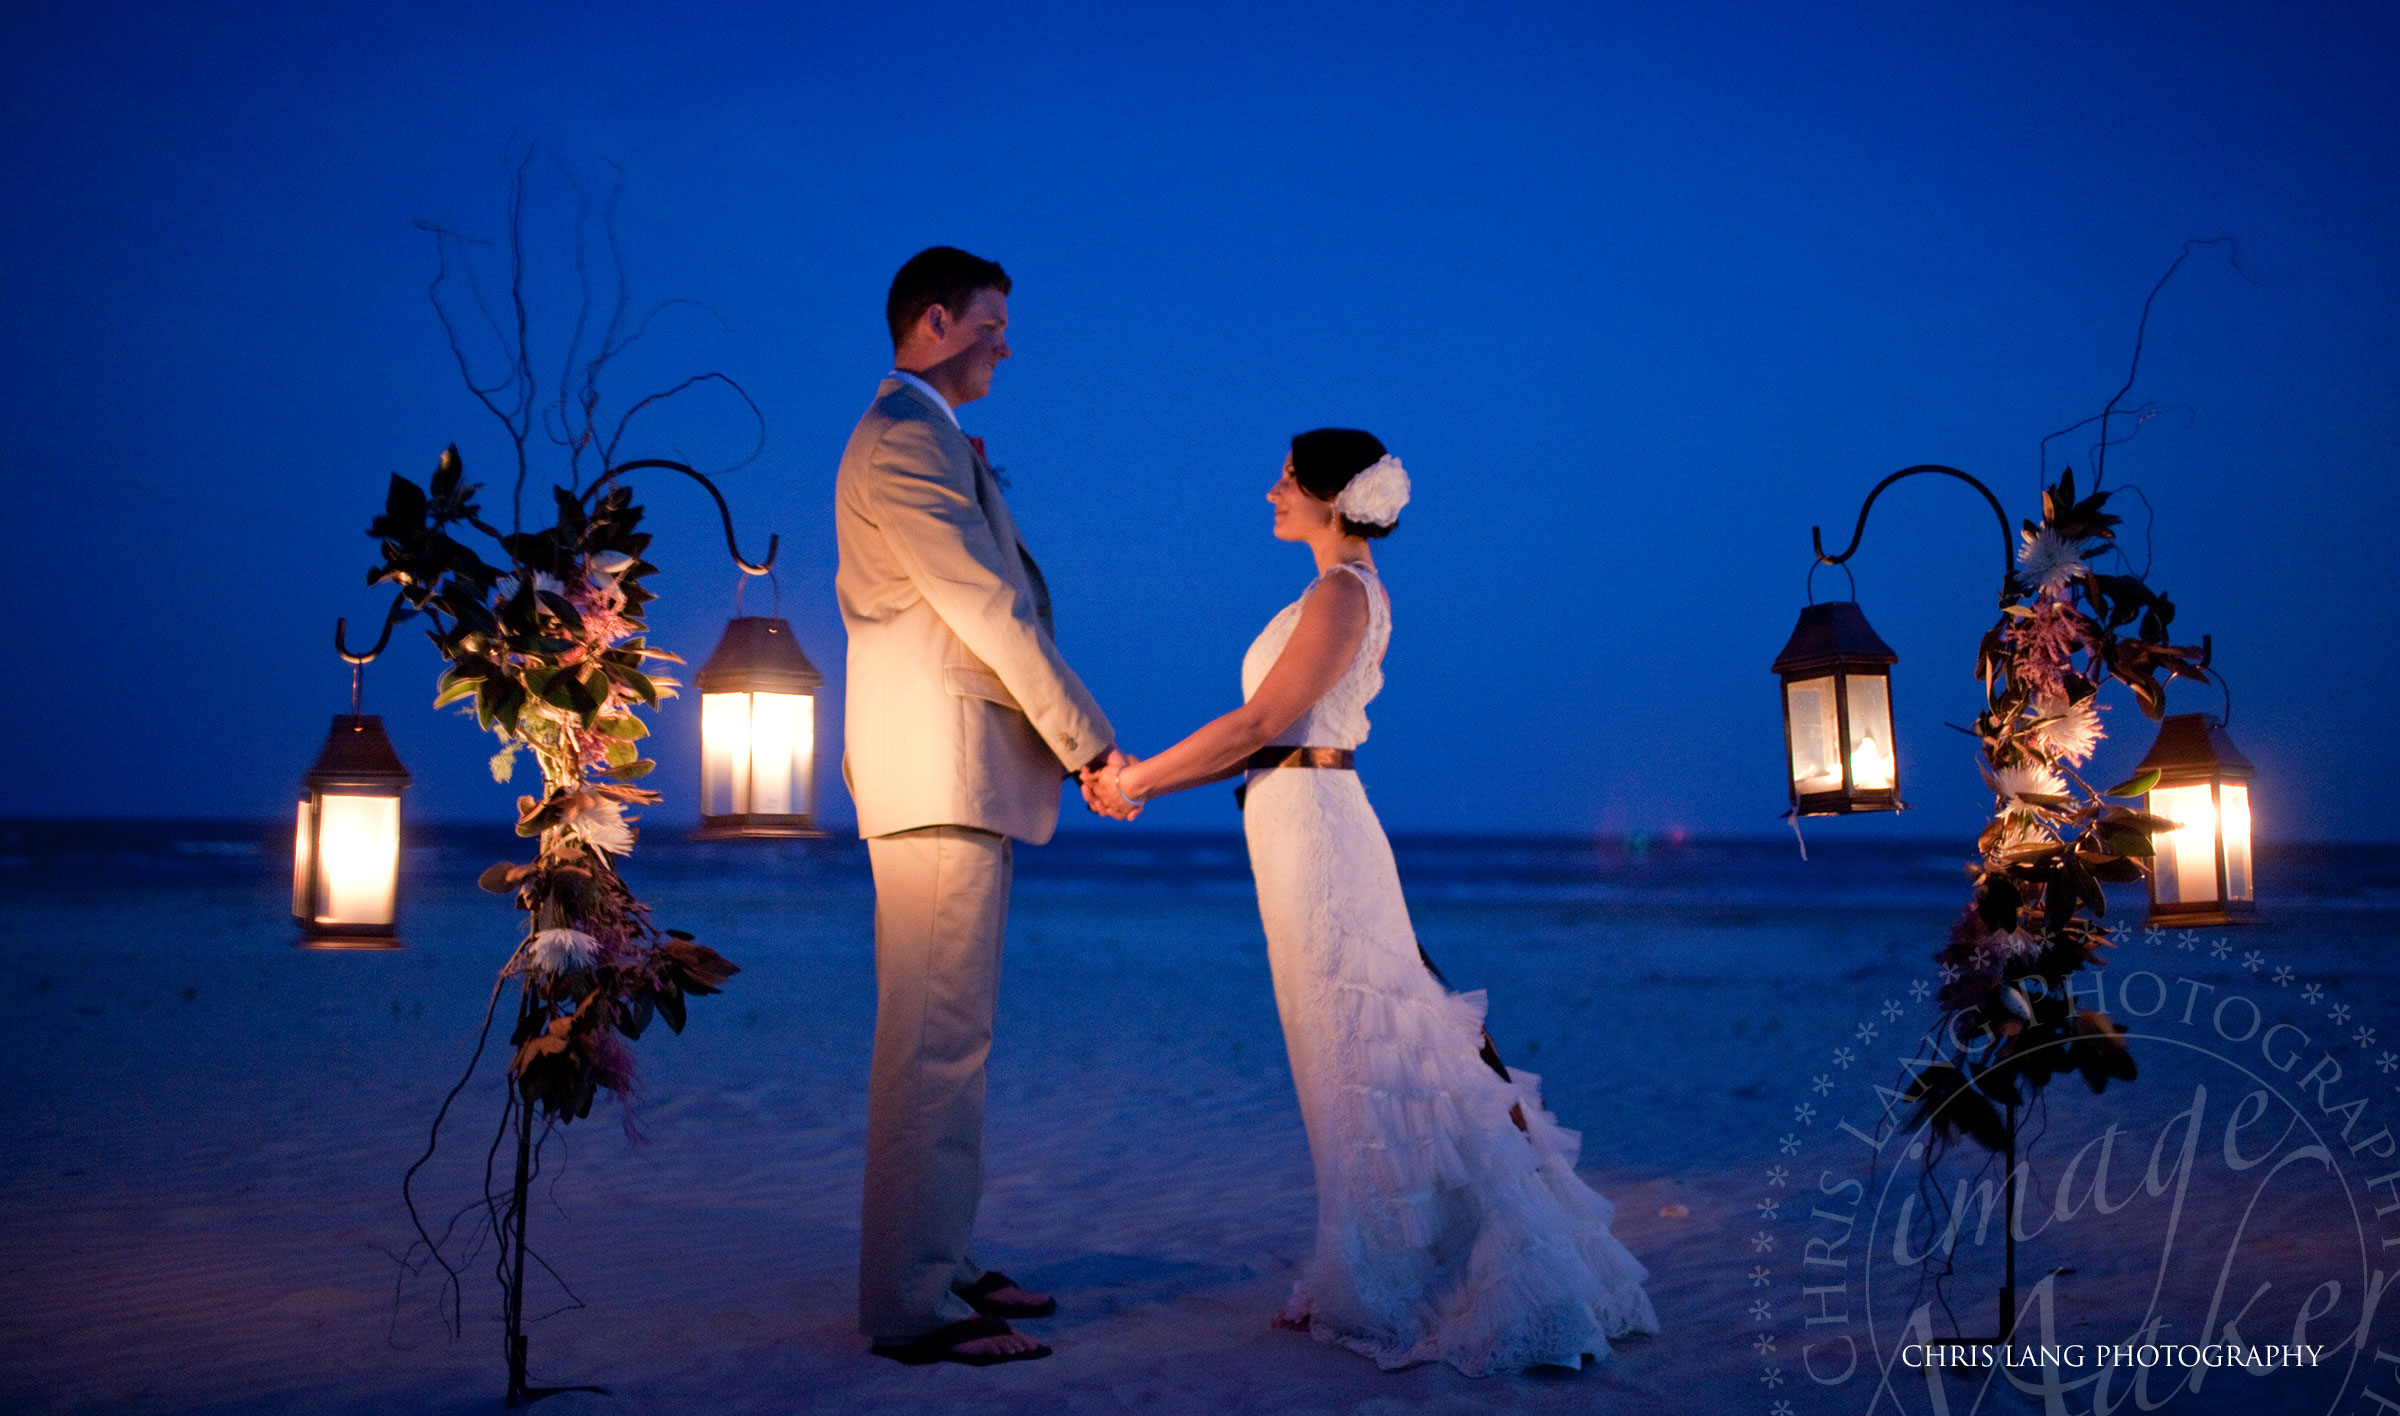 Wedding picture of a wedding couple holding hands at twilight in fron of some lanterns while on the beach after the beach wedding.  Destination wedding photographers